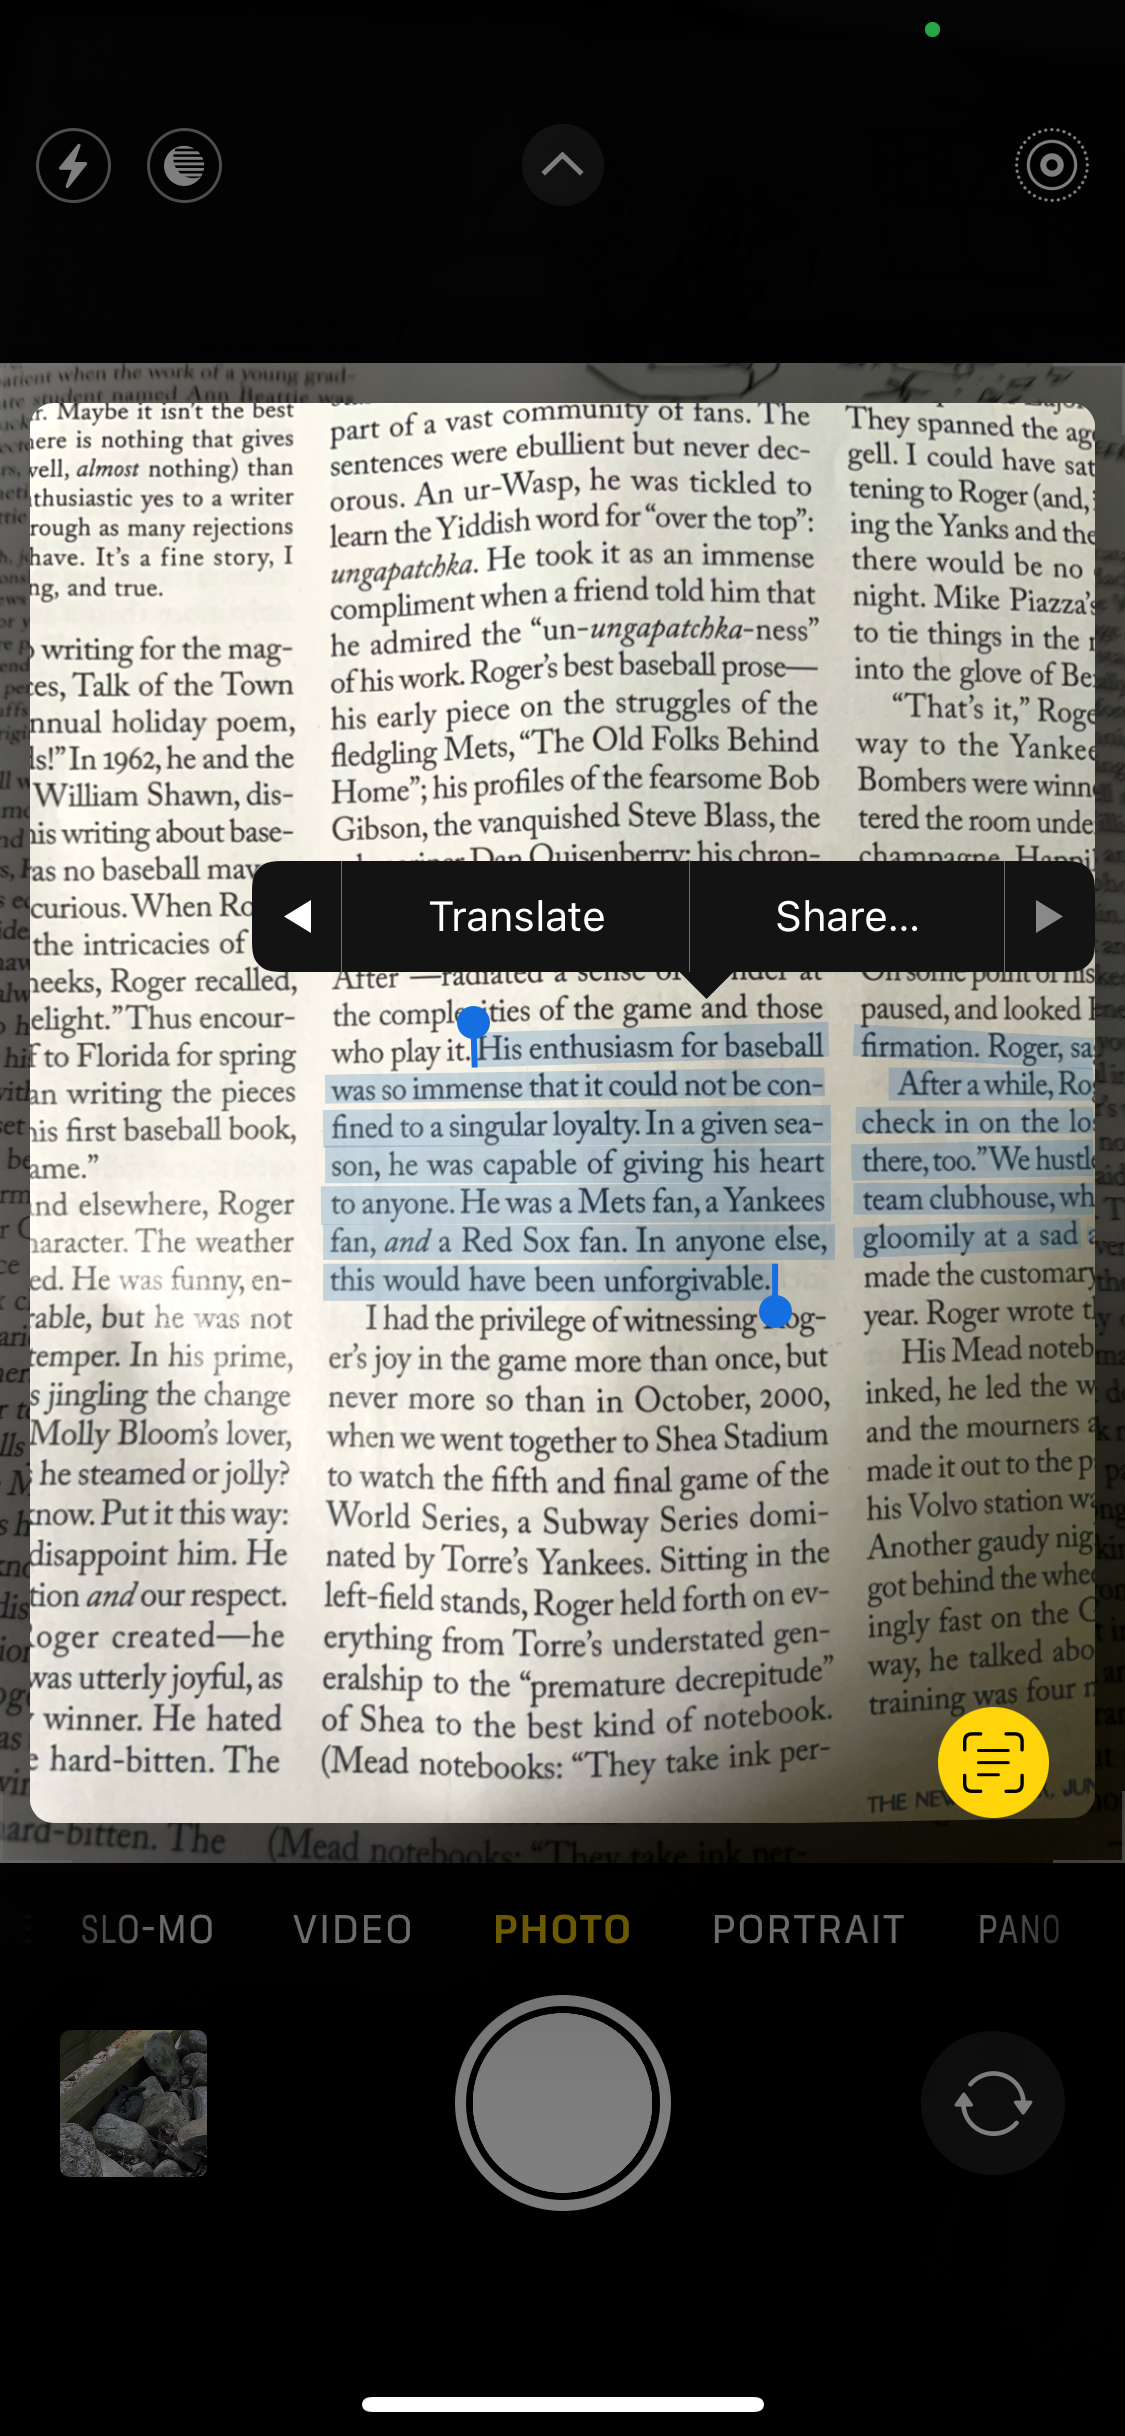 An iPhone screenshot showing text highlighted in the photo being taken using the phone camera's 'LiveText' feature.